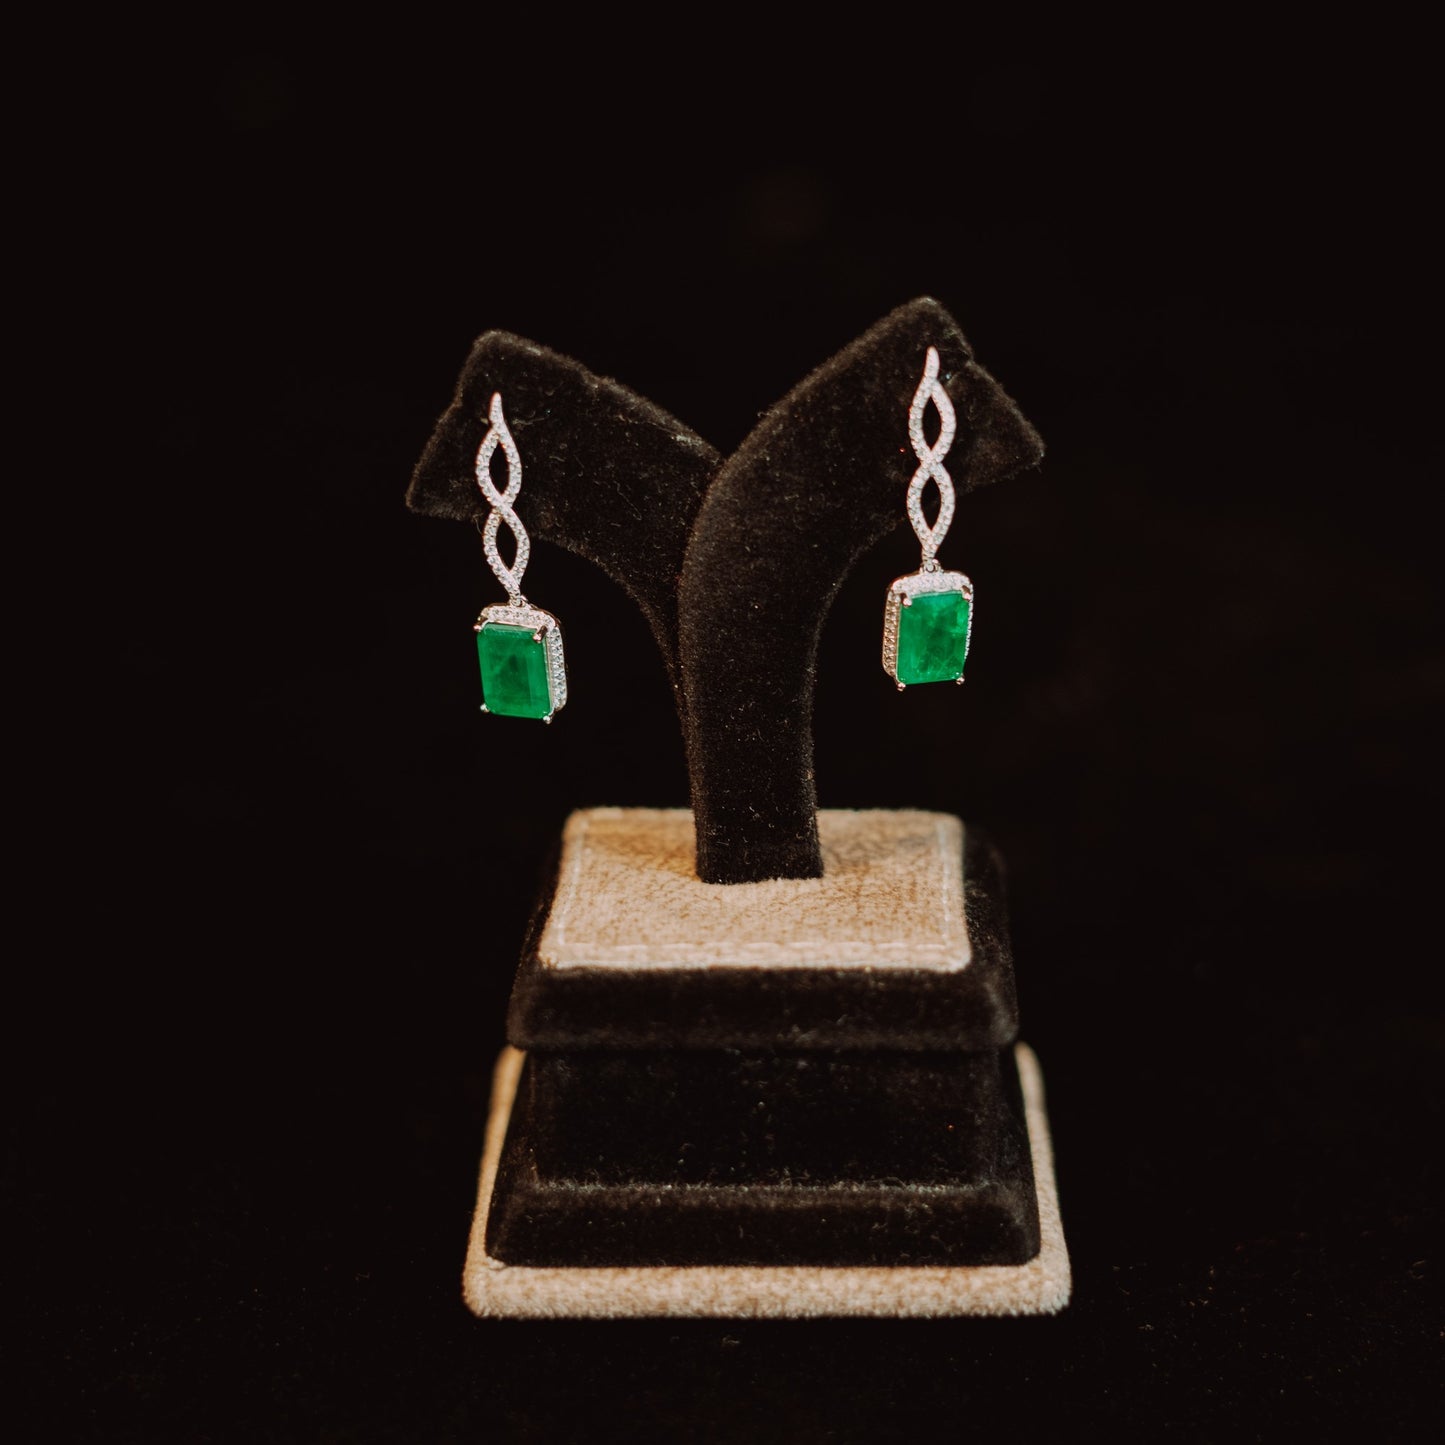 Colorful Square Drop Earrings with Zircon Accent